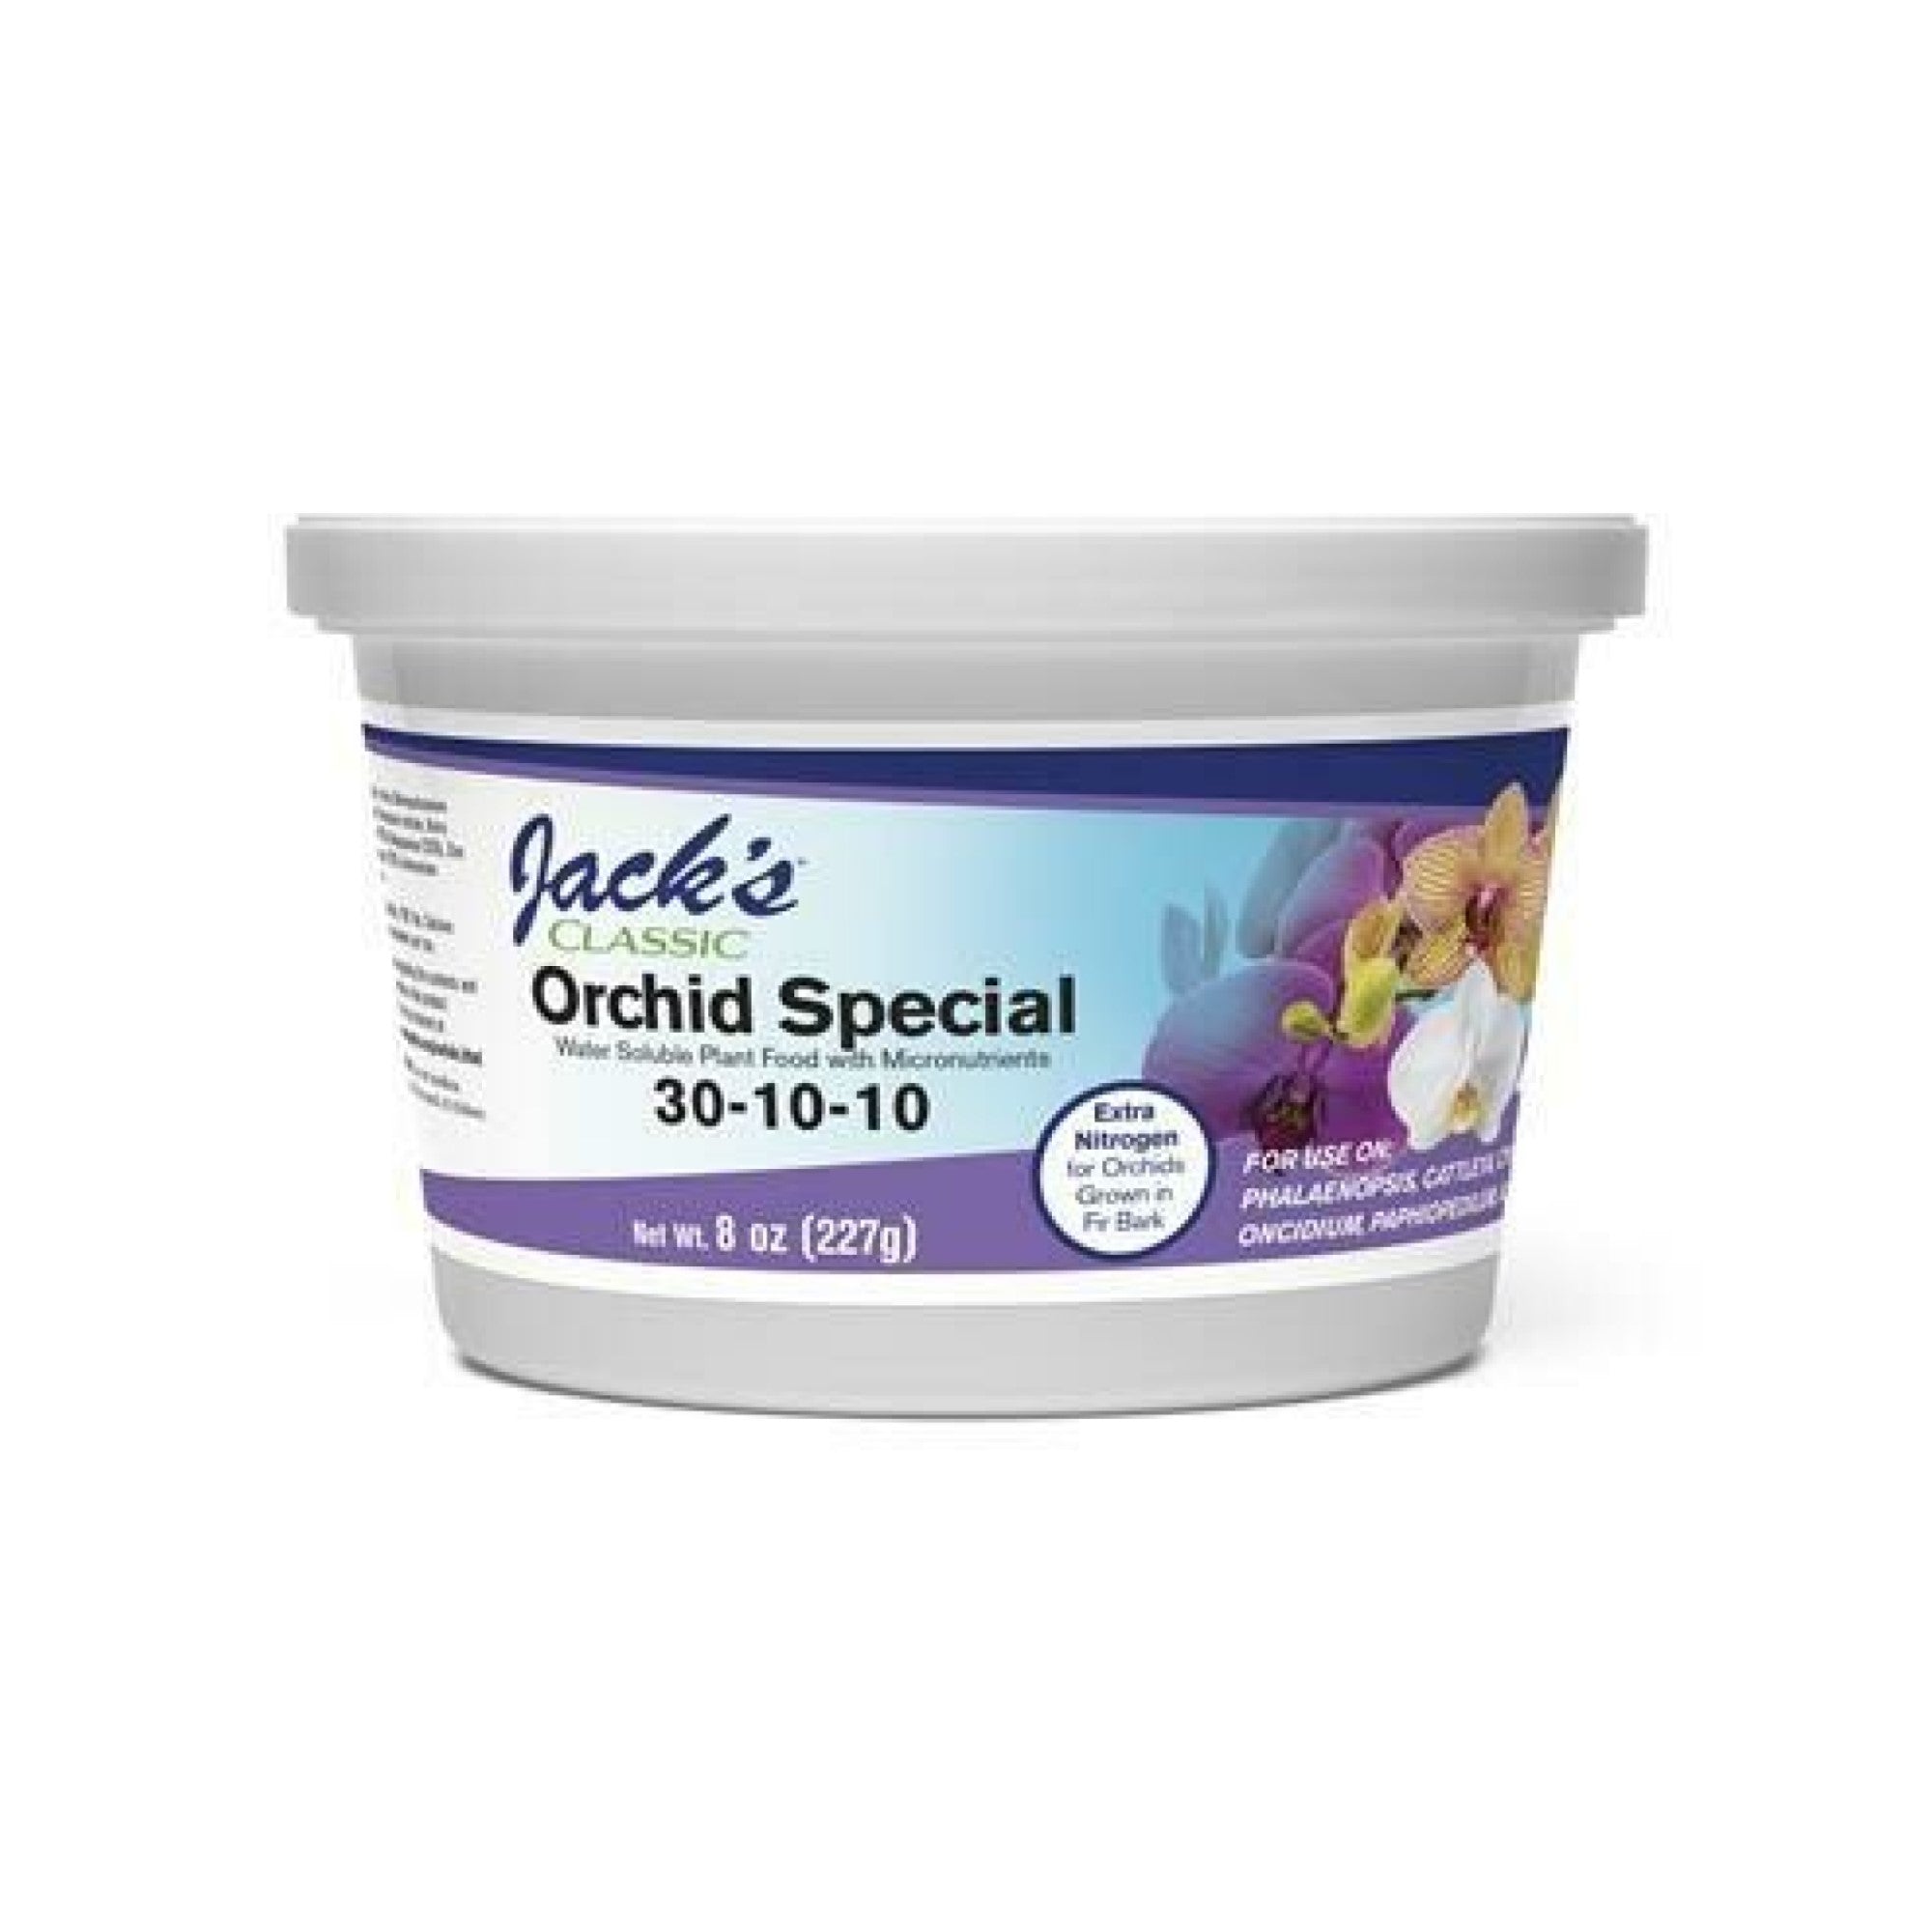 Jack's Classic 30-10-10 Orchid Special Water-Soluble Fertilizer with Micronutrients and Extra Nitrogen for Orchids, Turfs, and Ornamental Grasses, 8oz